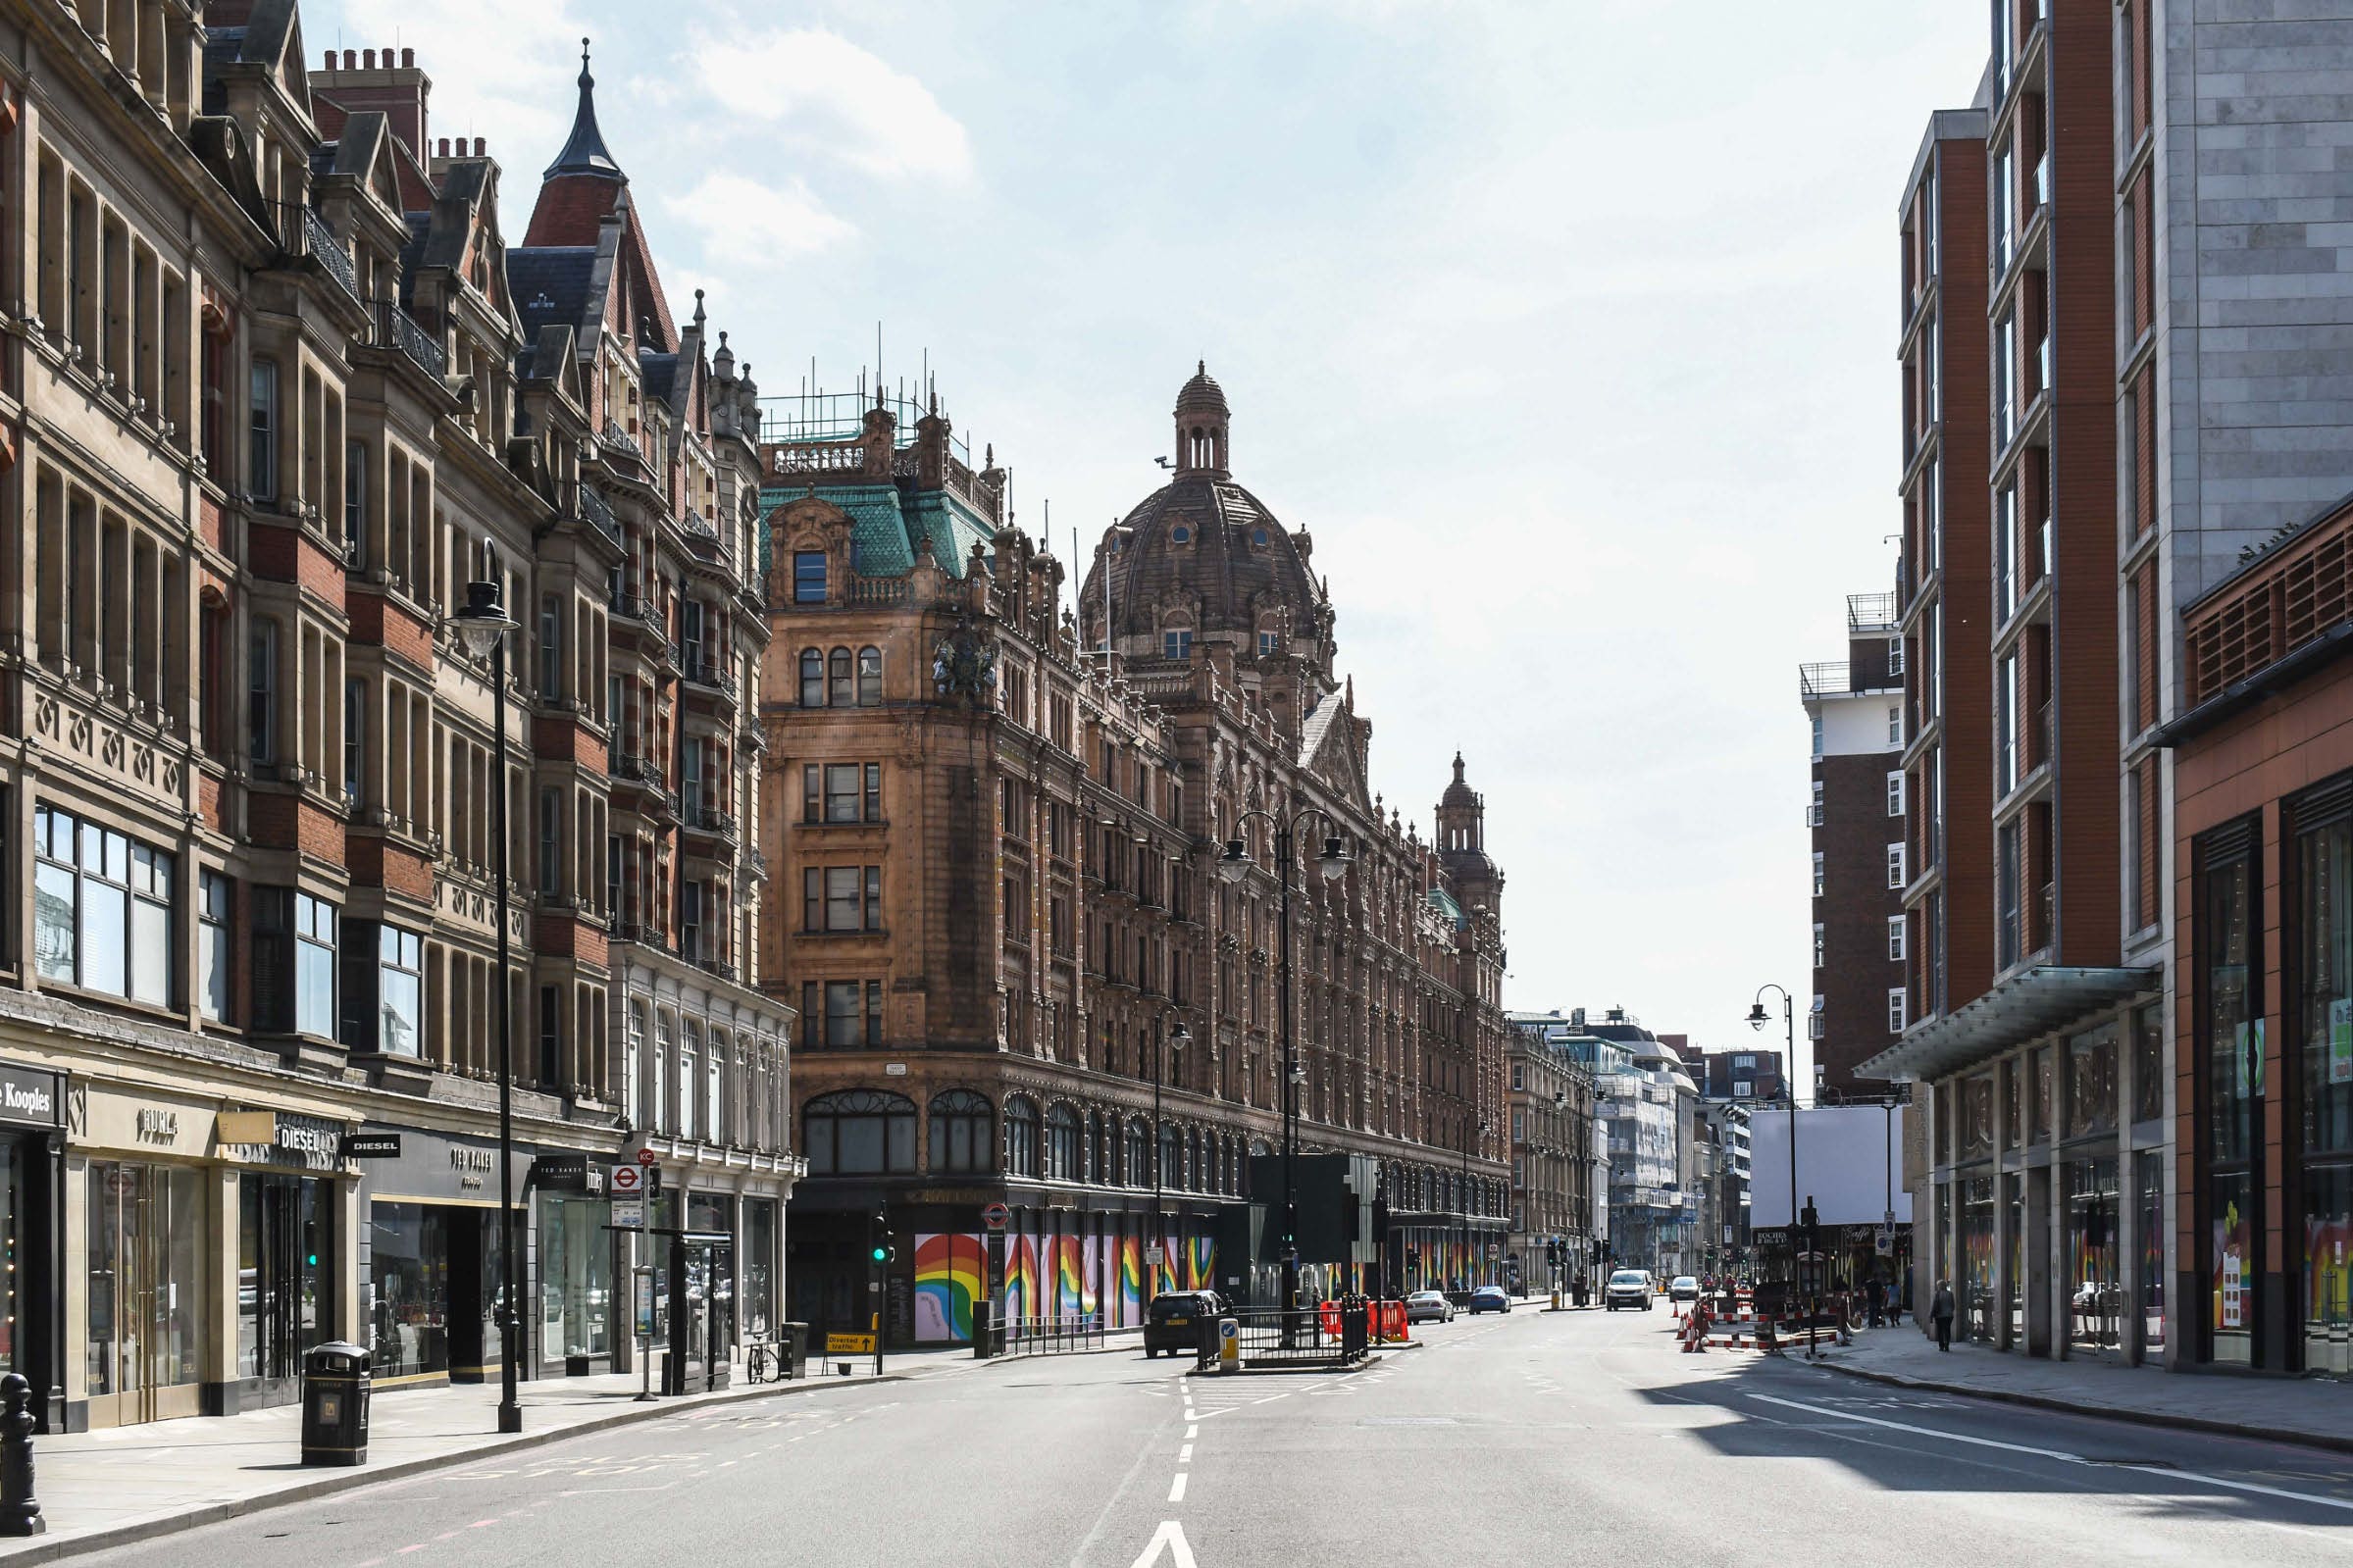 Harrods said staff had helped police with an incident outside their store on Monday afternoon